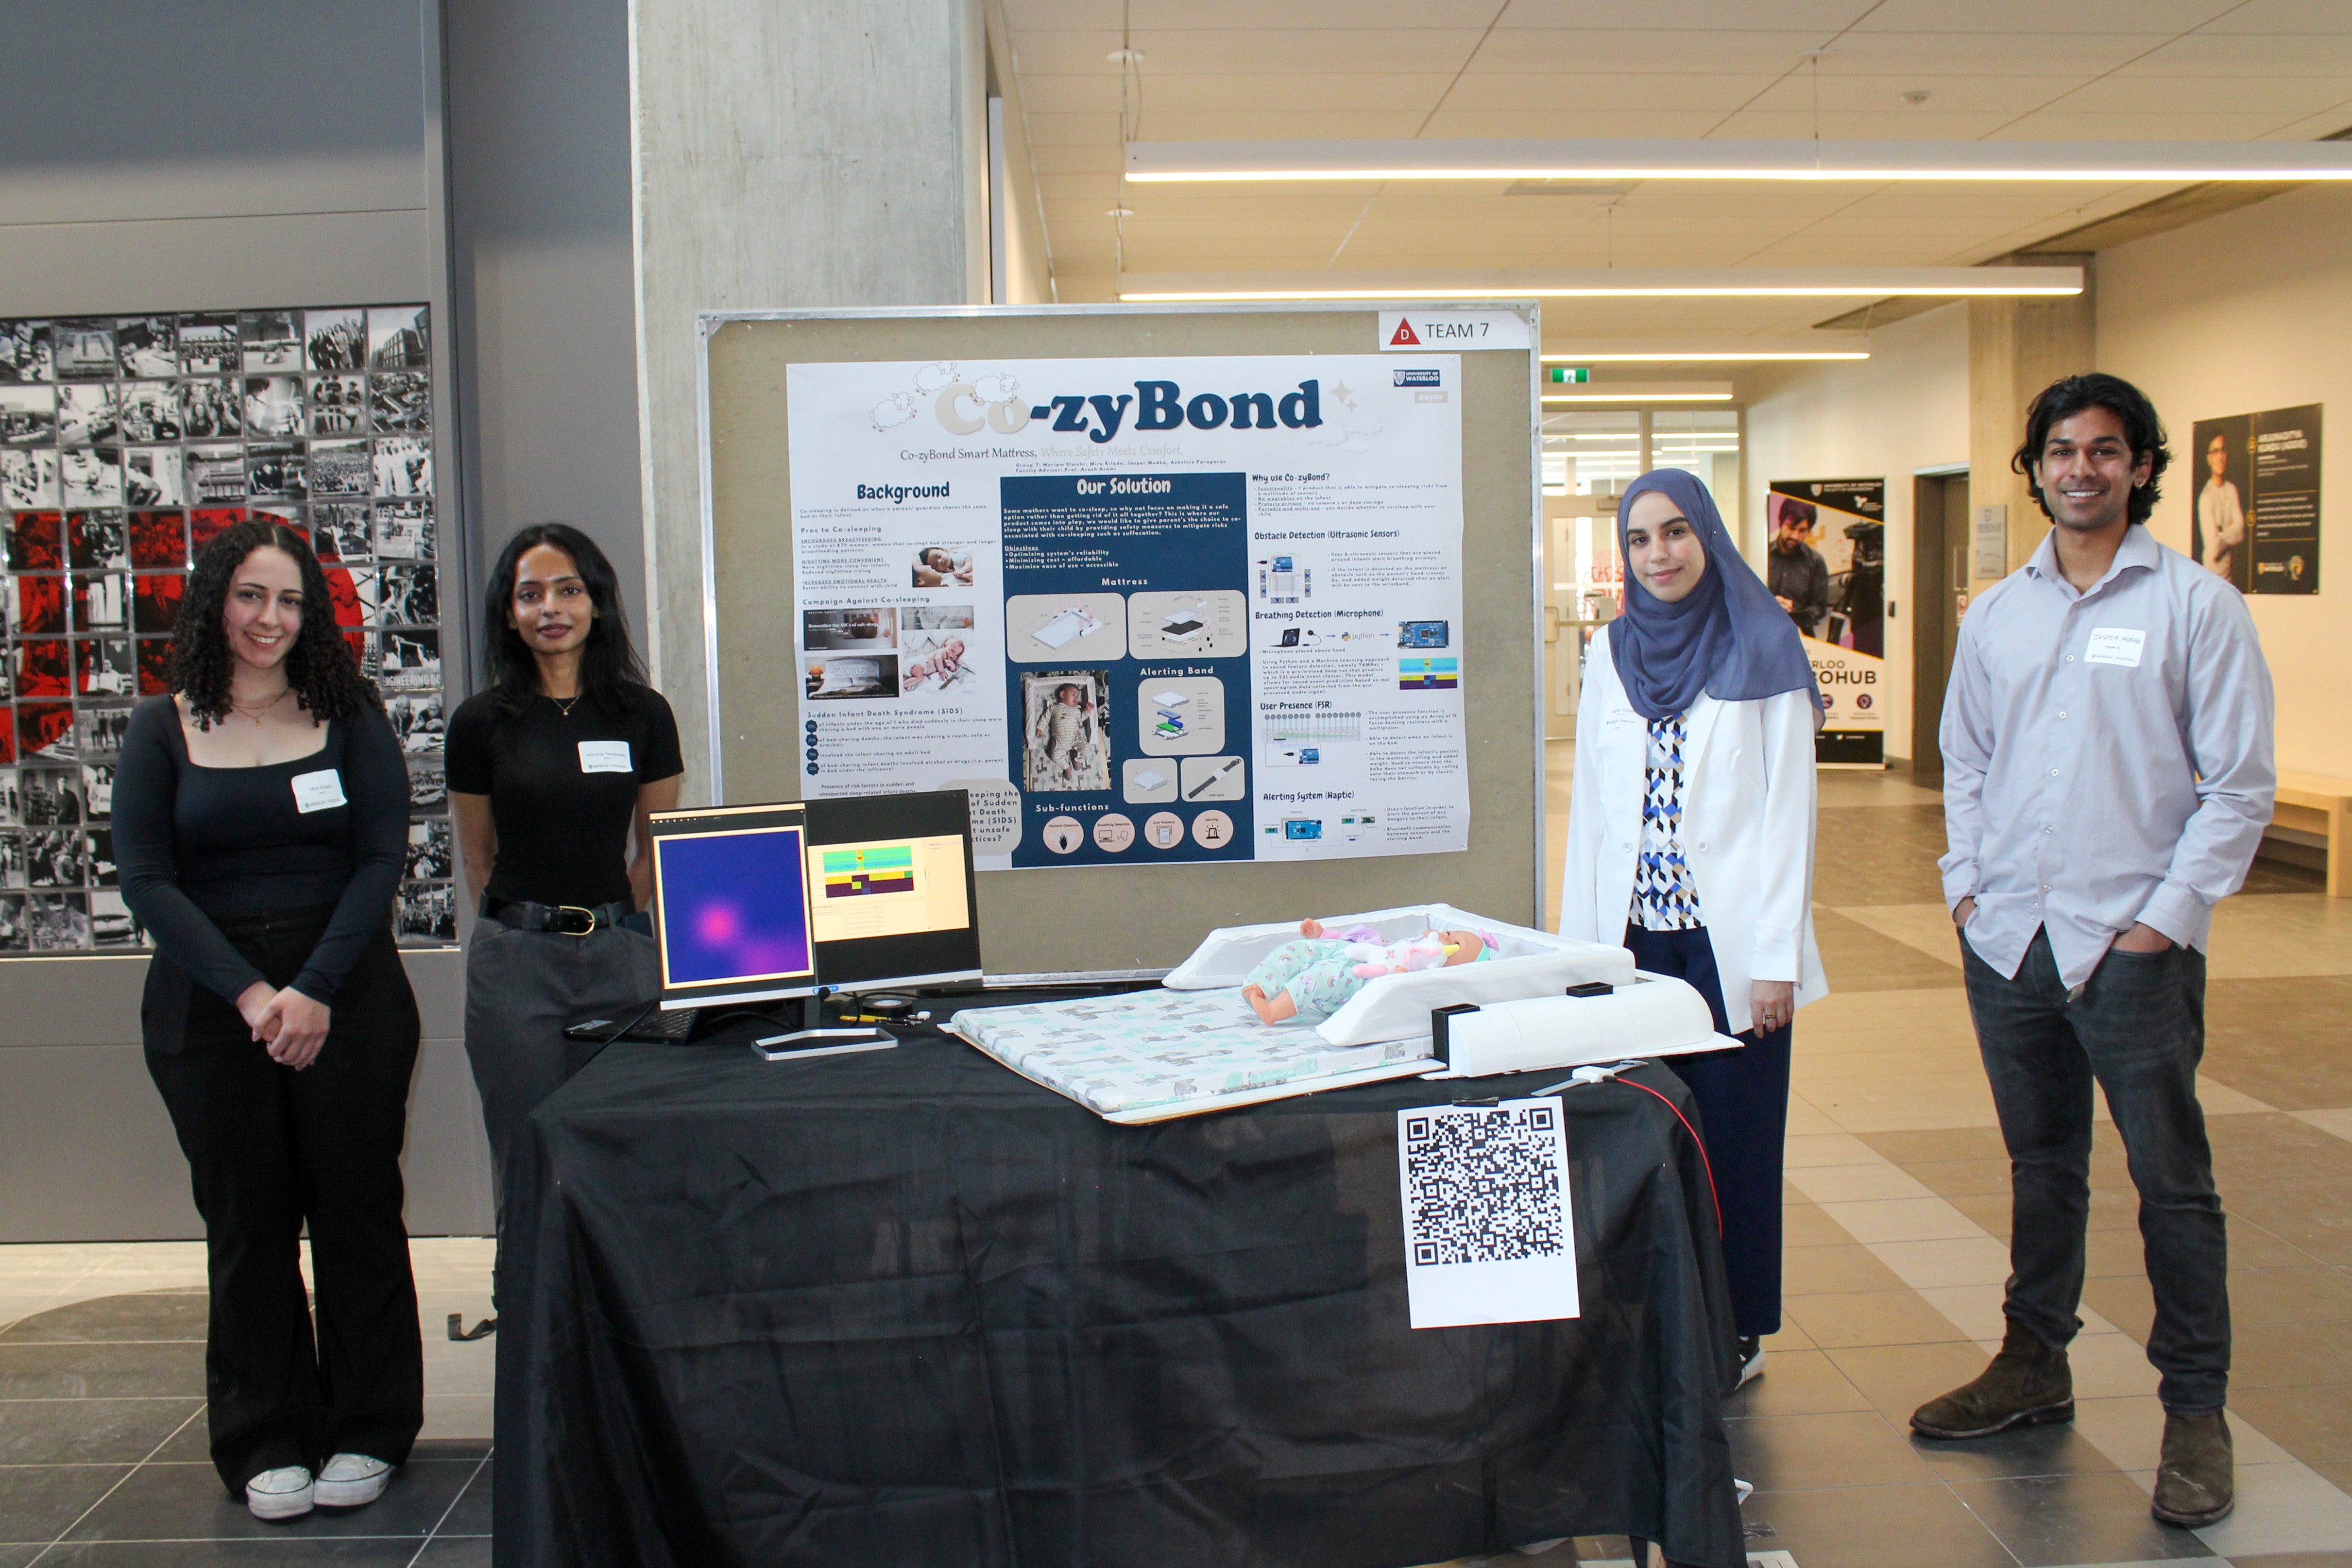 Co-zyBond Team with their booth